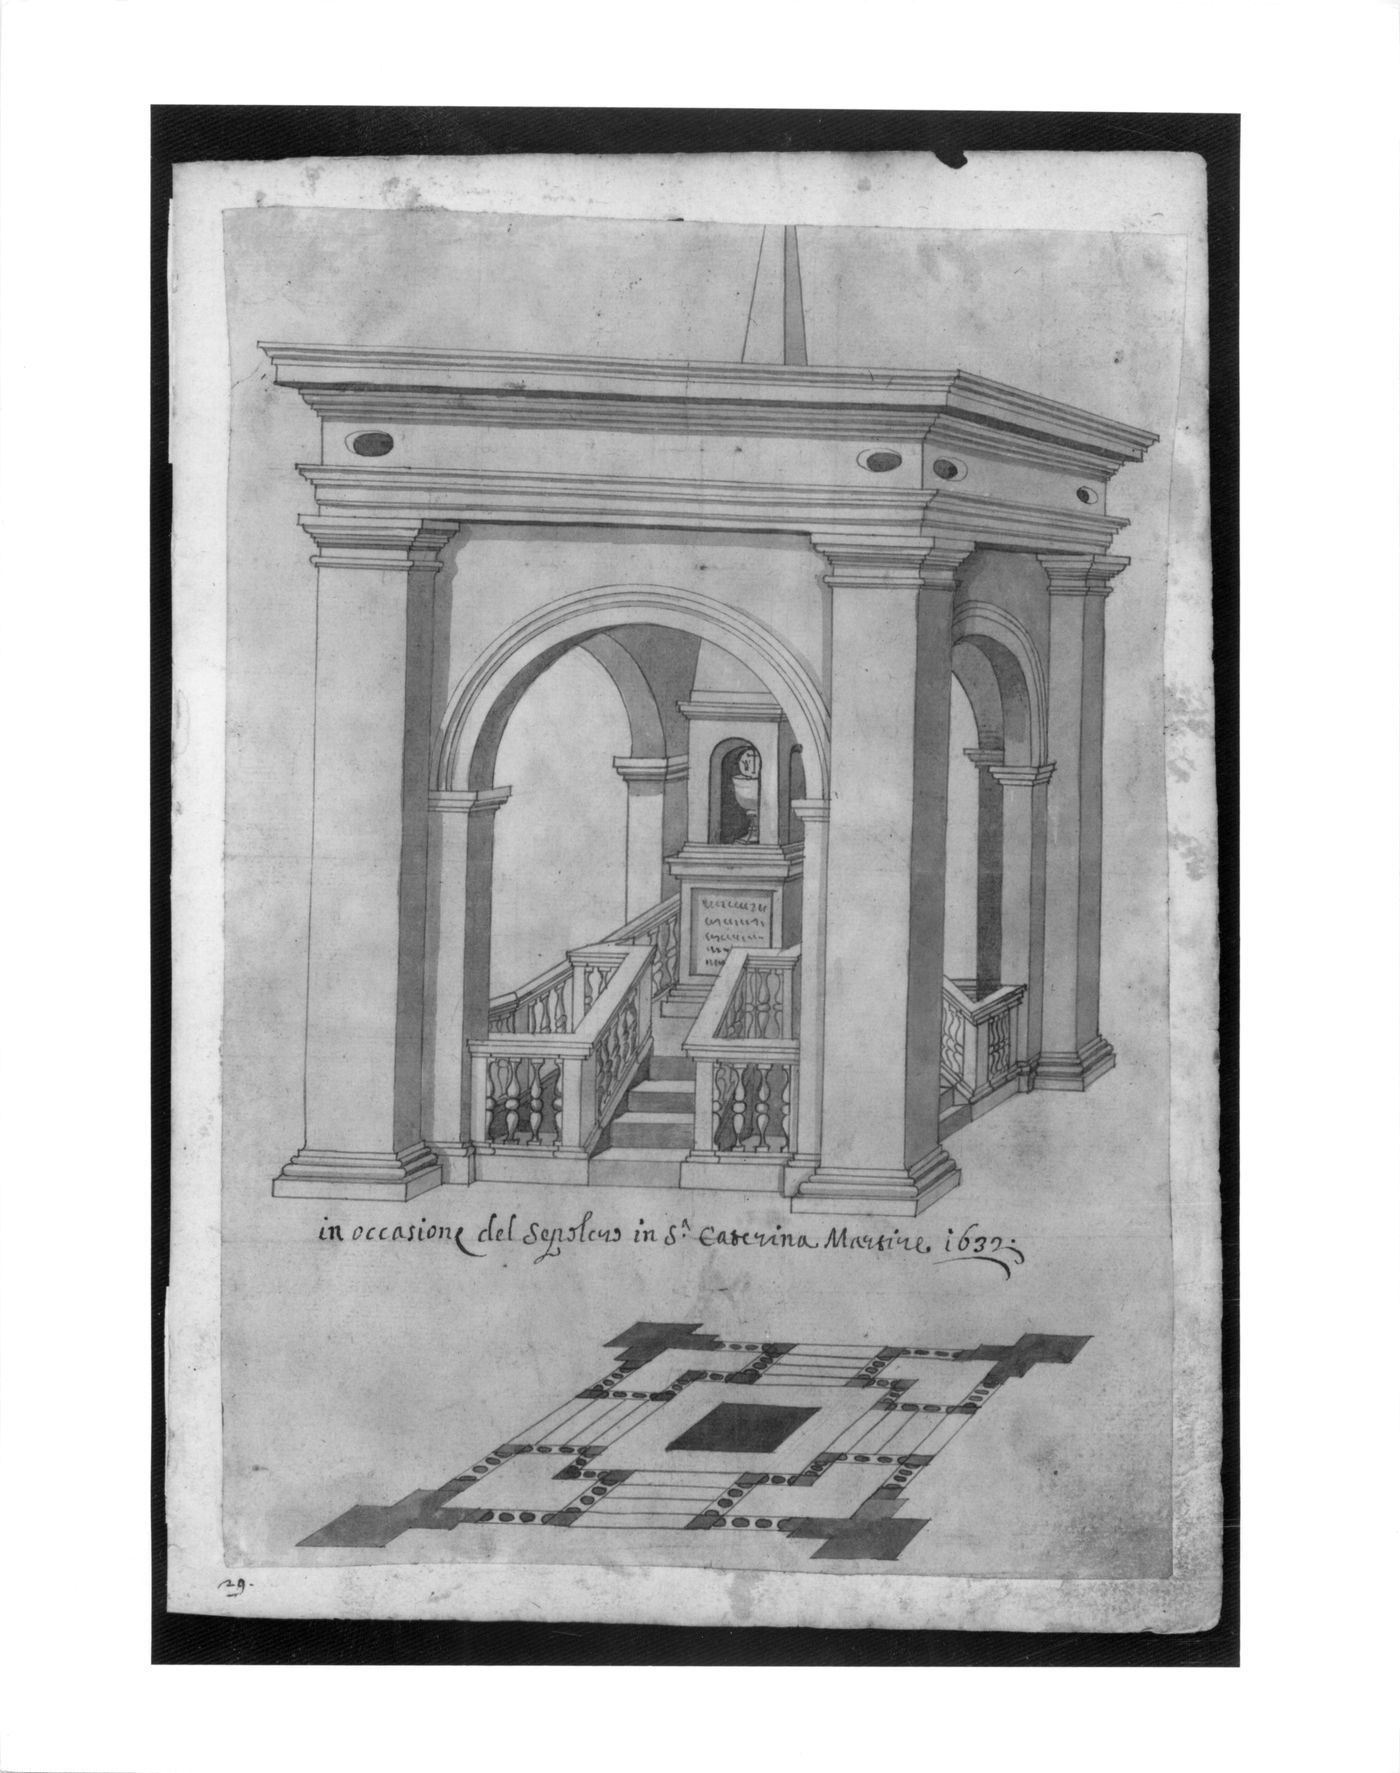 Perspective sketch and plan of a tomb in Santa Caterina Martire